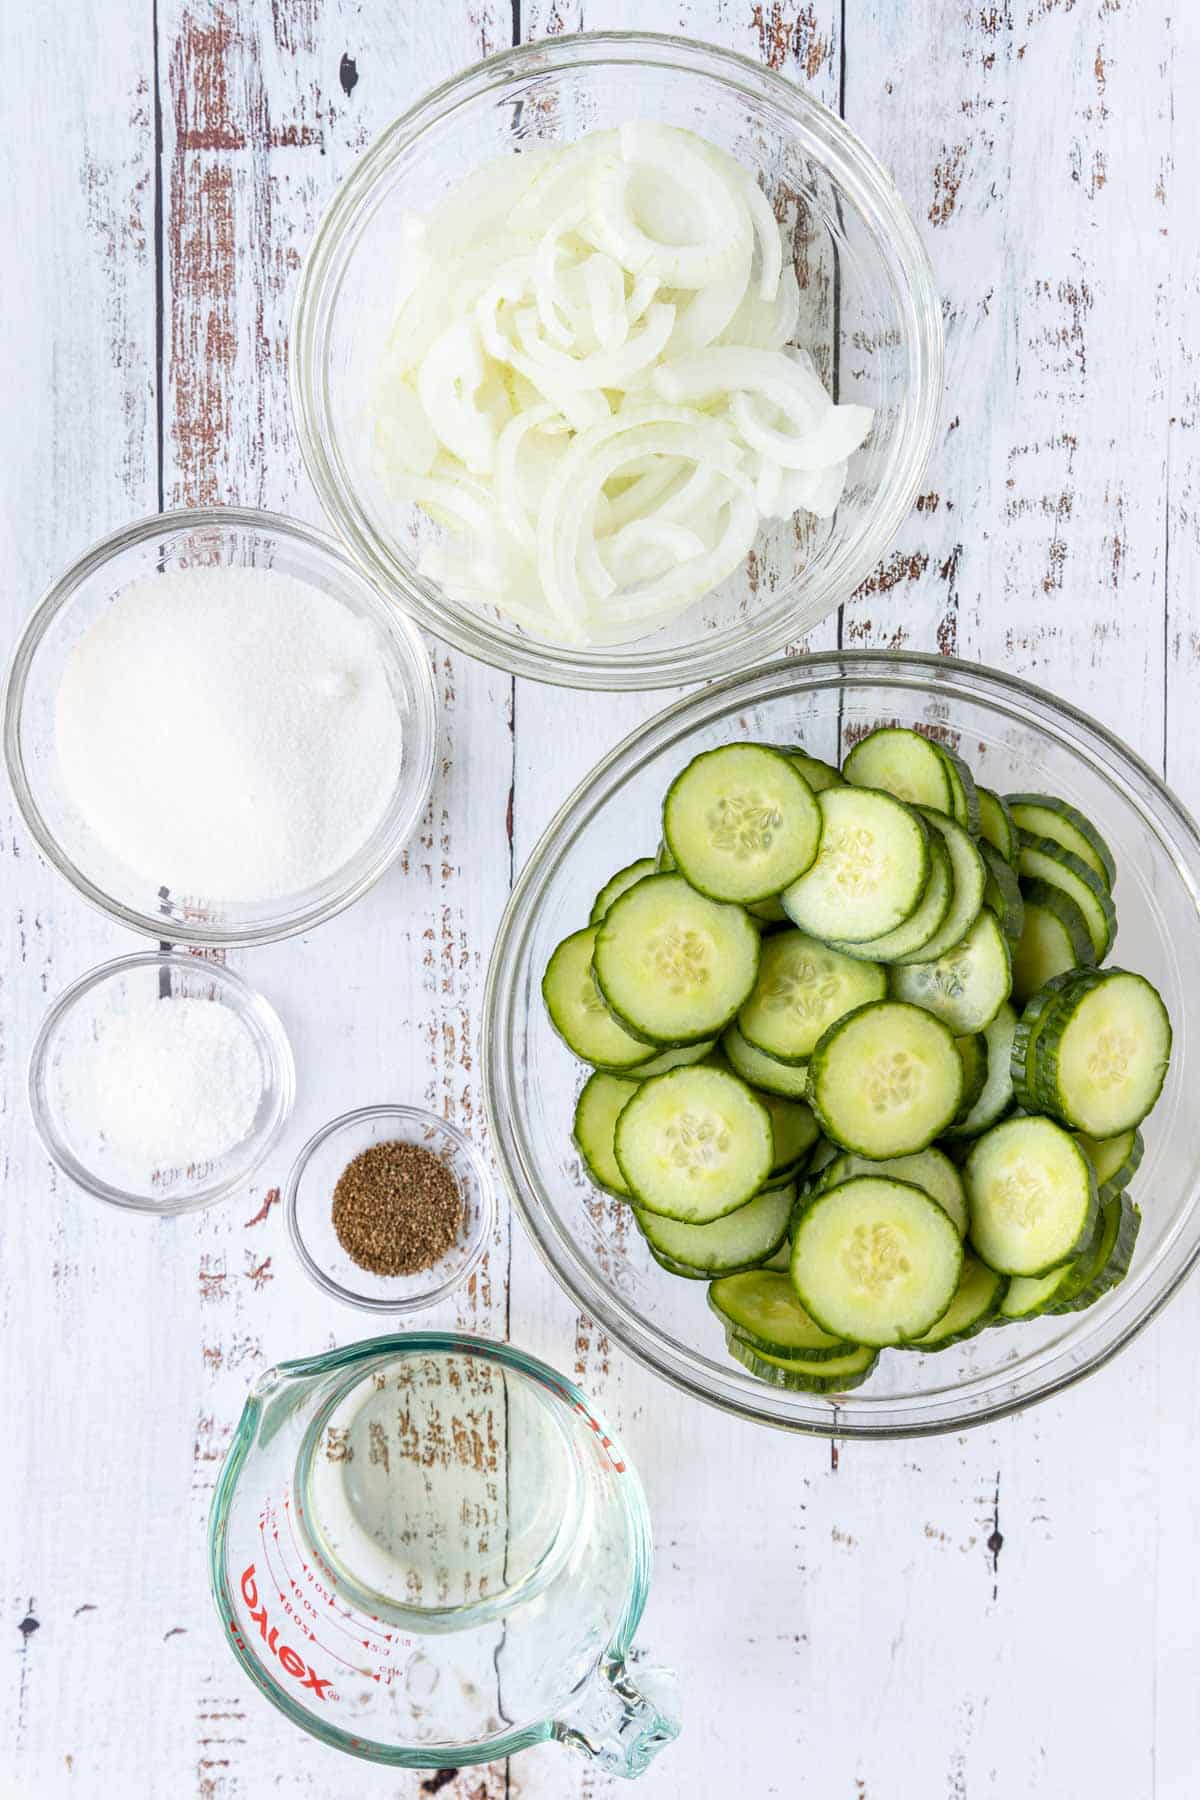 Ingredients for cucumber and onion salad on a table